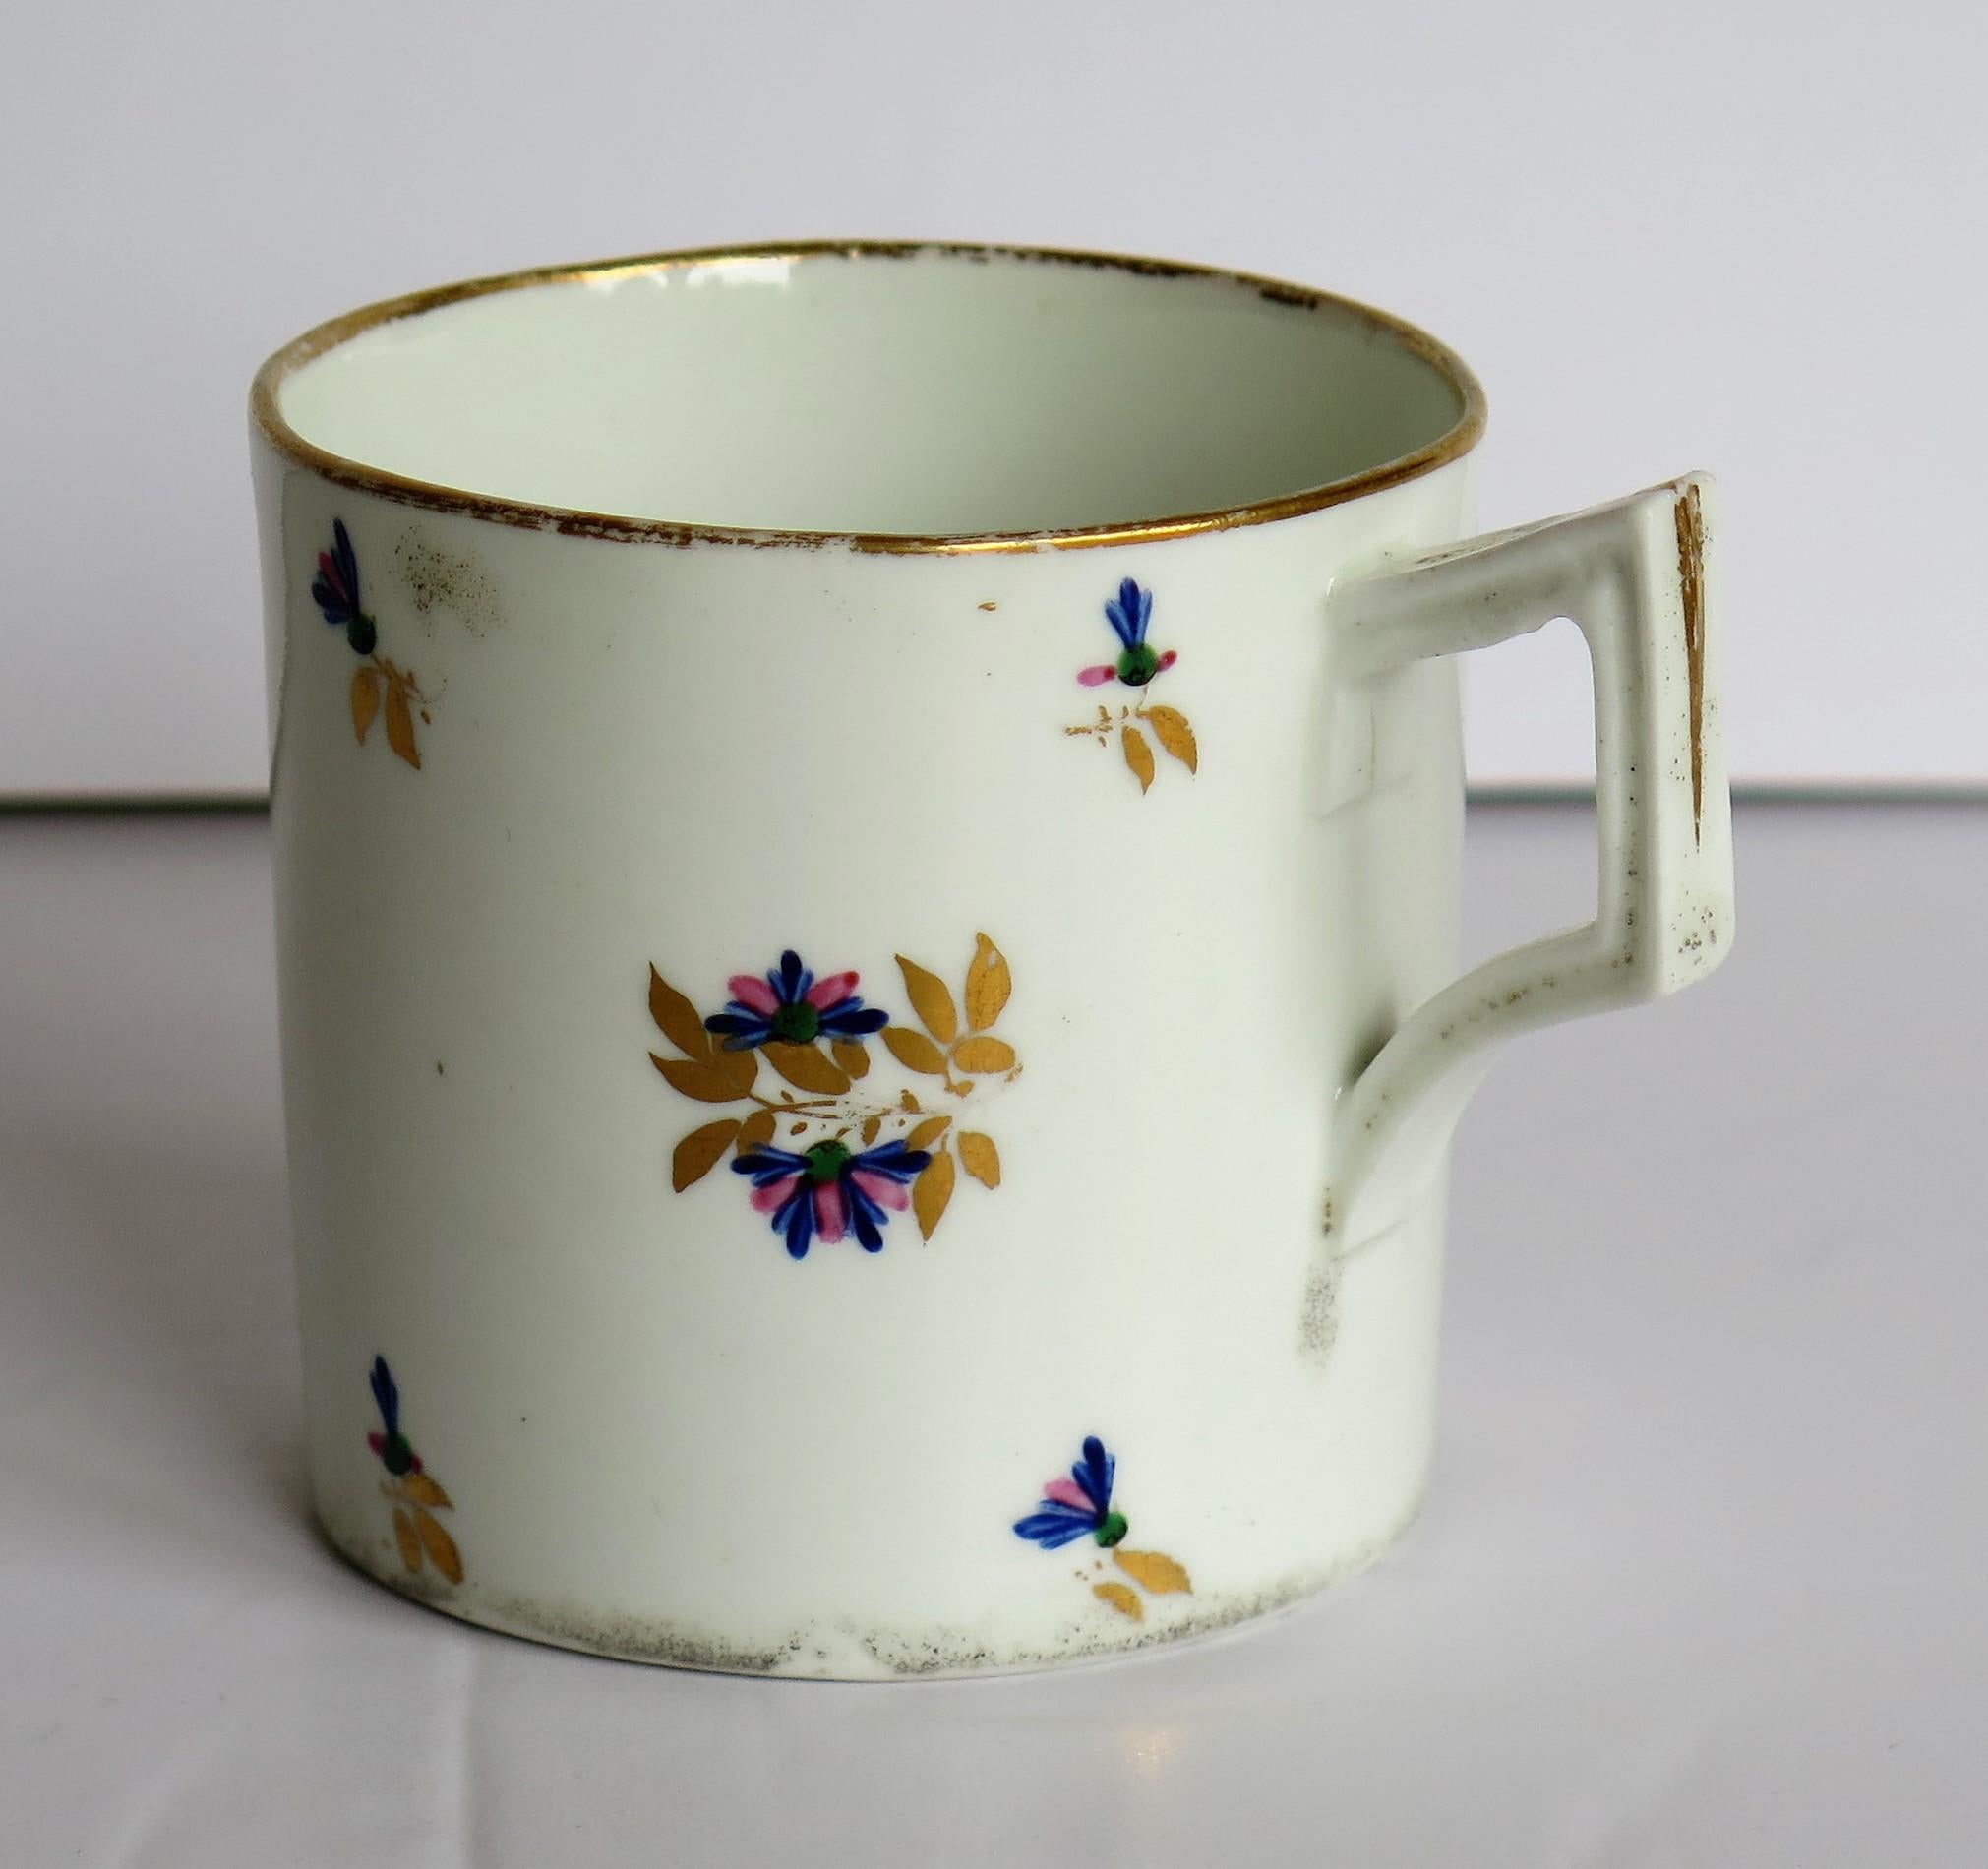 This is a good porcelain Coffee Can or cup hand painted and gilded in pattern 129, made by the Derby factory, in the reign of George 111 in the early 19th century, circa 1805 to 1810.

It is nominally straight sided with a square grooved